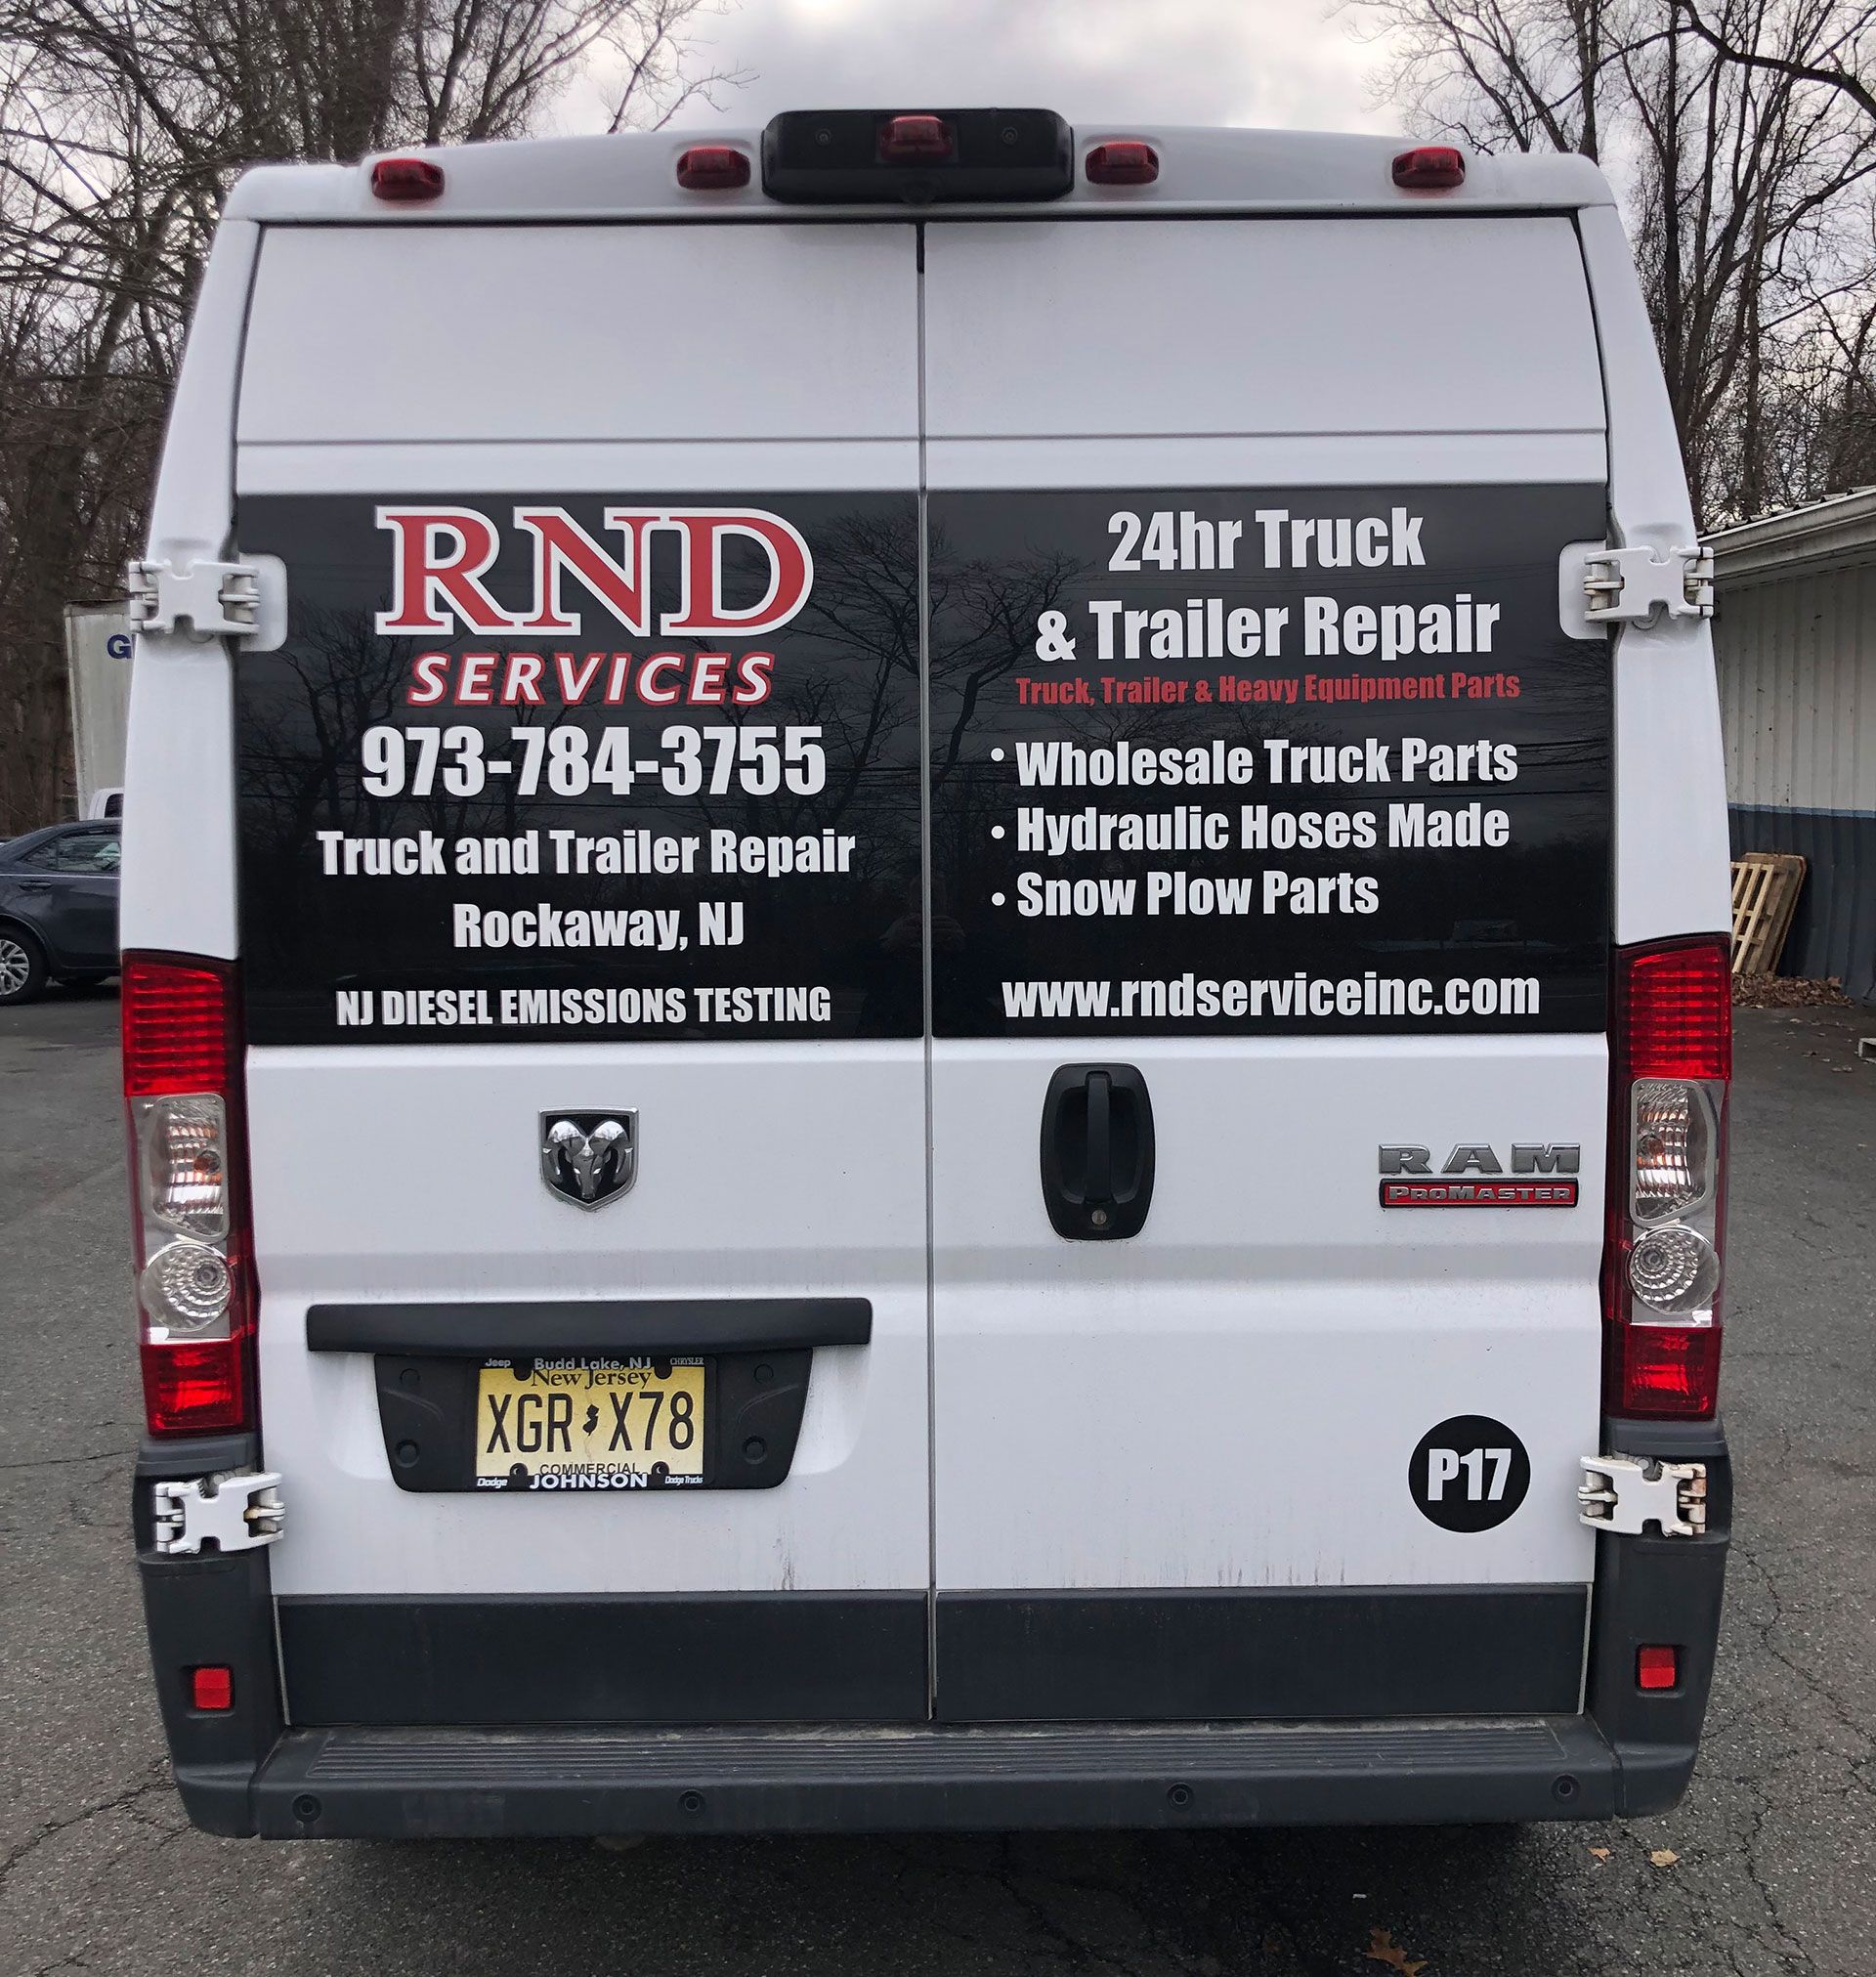 RND Services truck